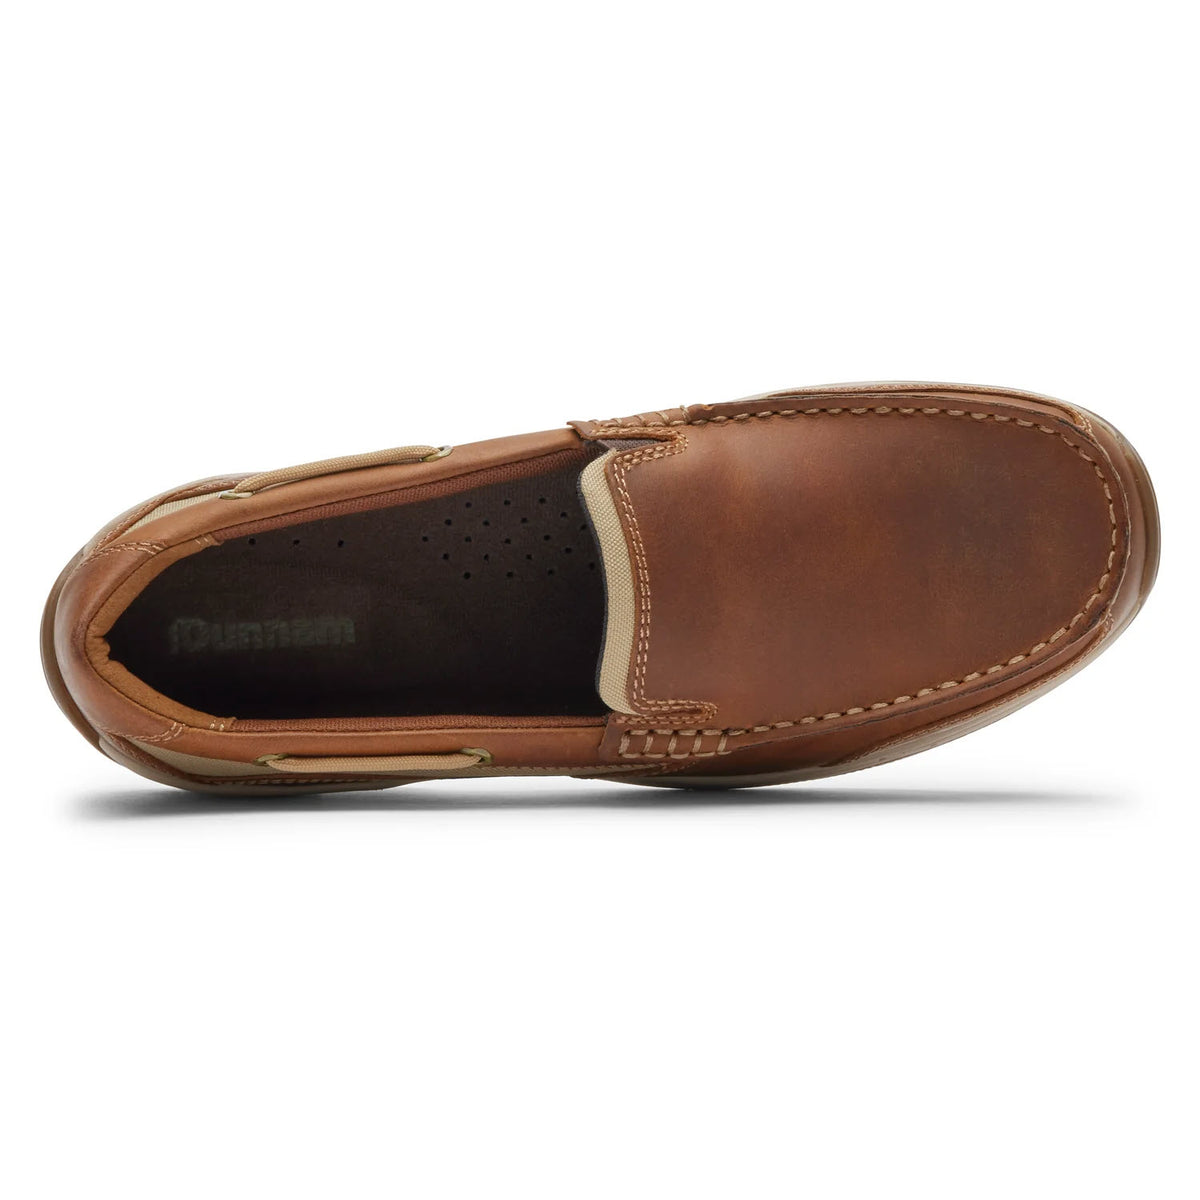 Top view of a single Dunham Captain Venetian Tan Leather slip-on loafer with visible stitching and a black insole, displayed on a white background.